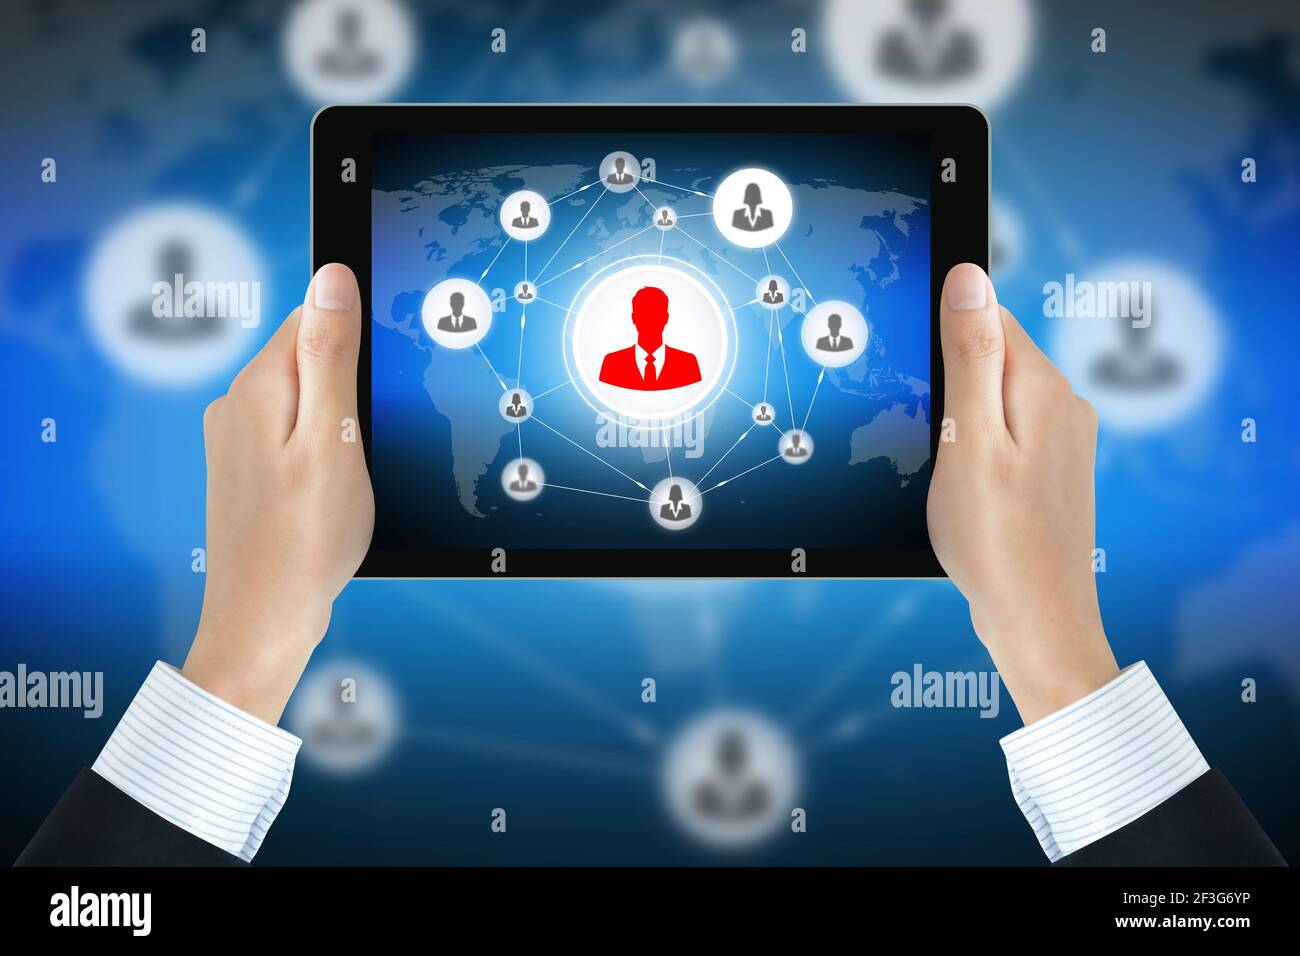 Businessman hands holding tablet pc with businesspeople icons linked as network on the screen - online business & social network concepts Stock Photo